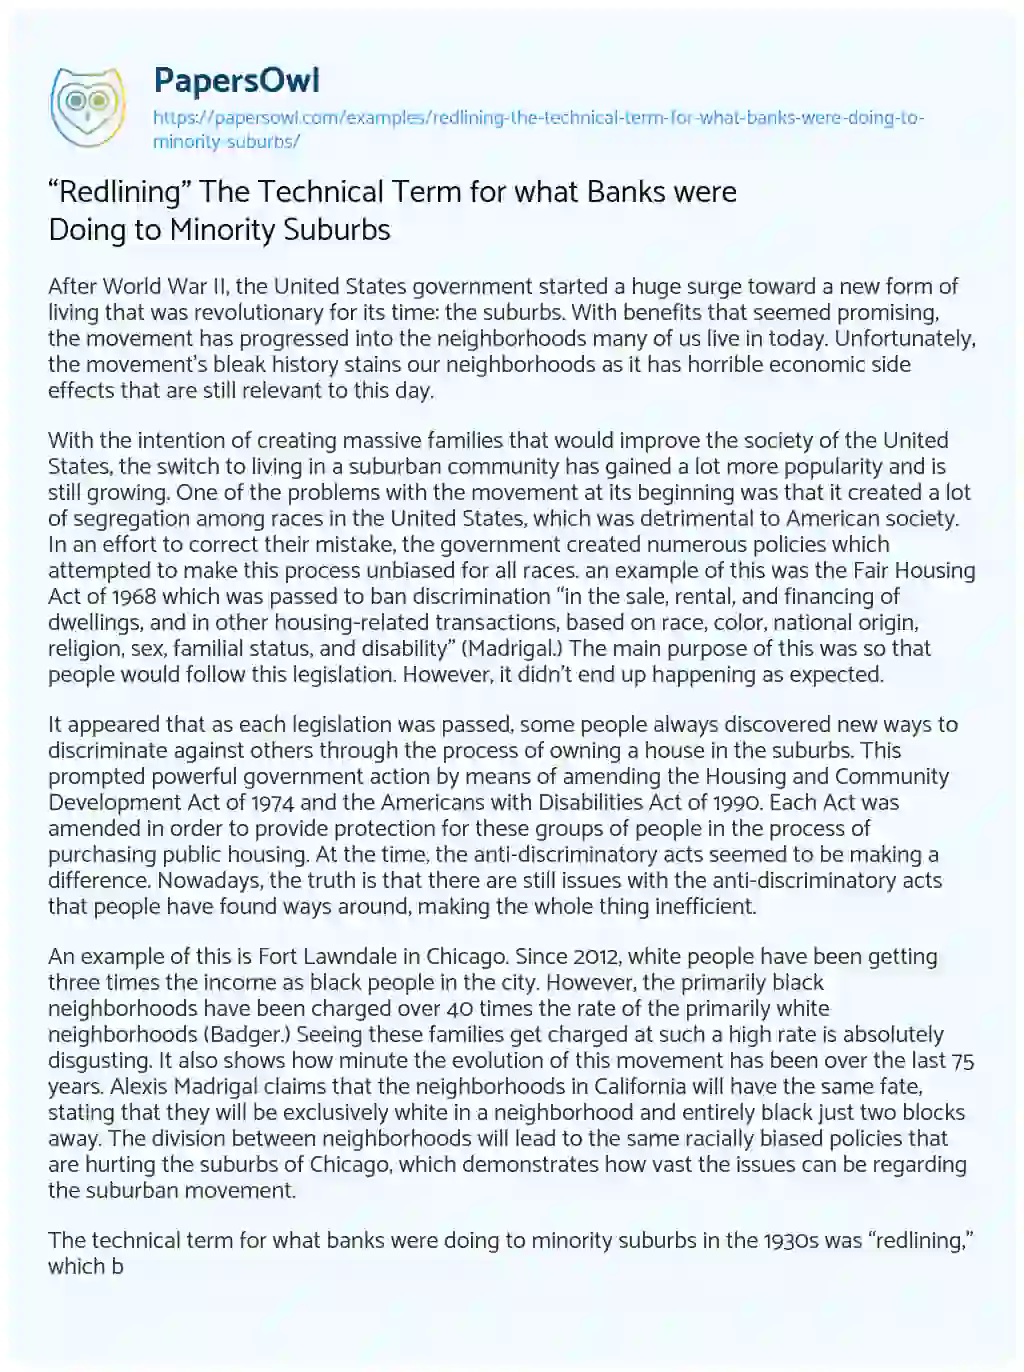 Essay on “Redlining” the Technical Term for what Banks were doing to Minority Suburbs